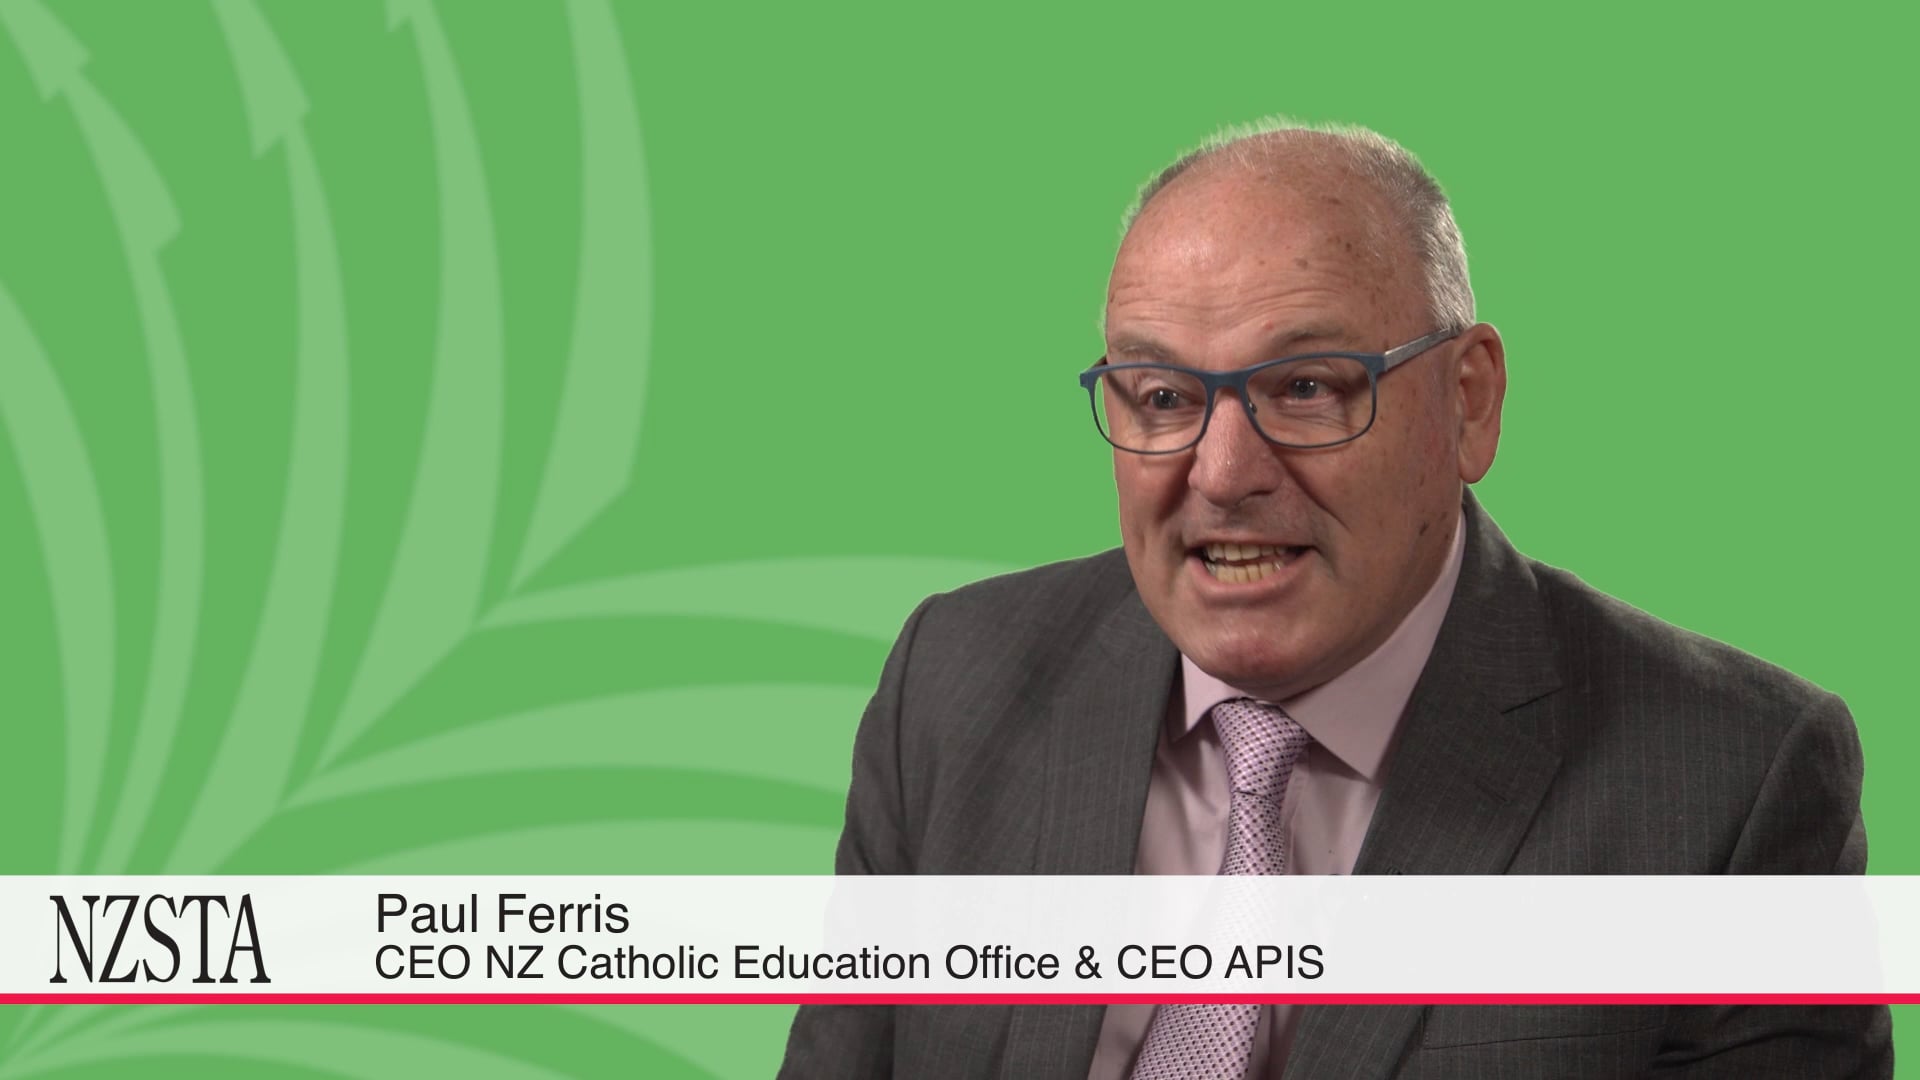 Governance in state integrated schools - Paul Ferris CEO NZ Catholic Education Office